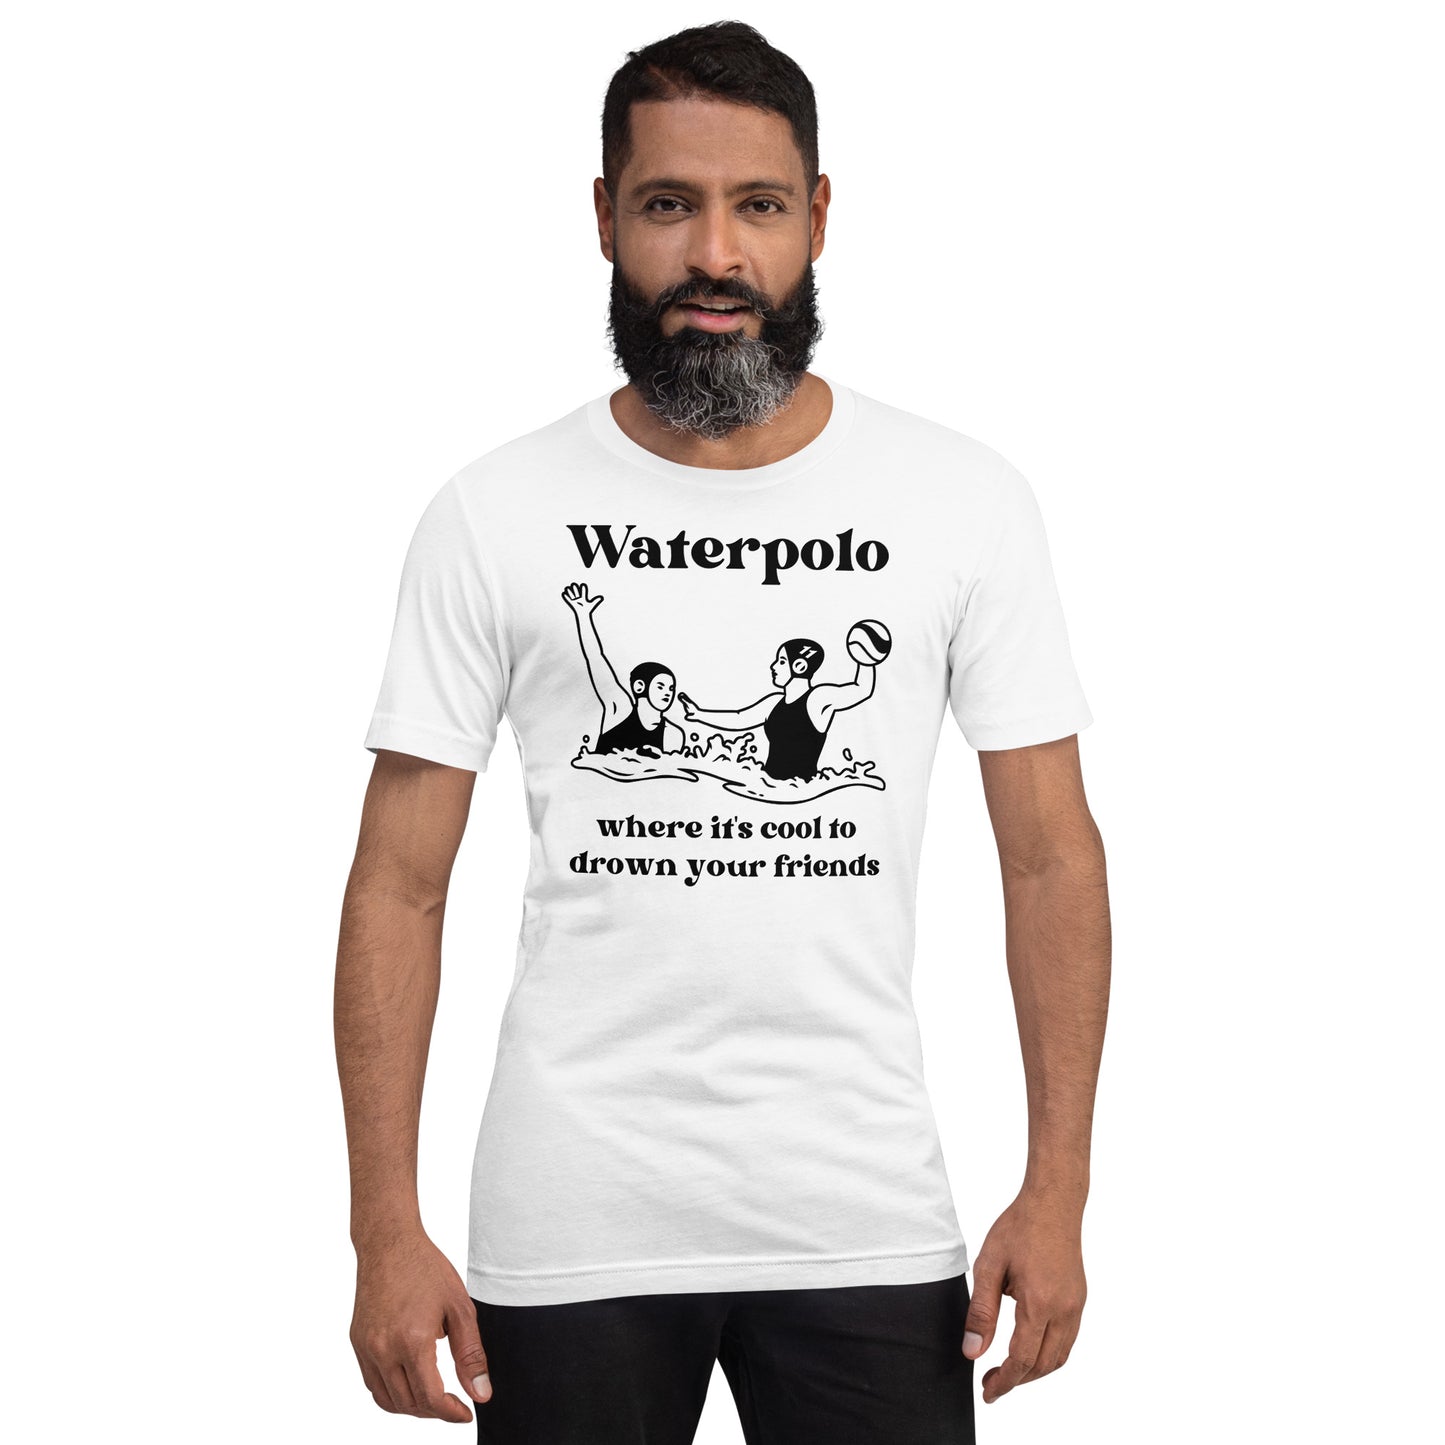 Waterpolo, where it's cool to drown your friends - Unisex Soft T-shirt - Bella Canvas 3001